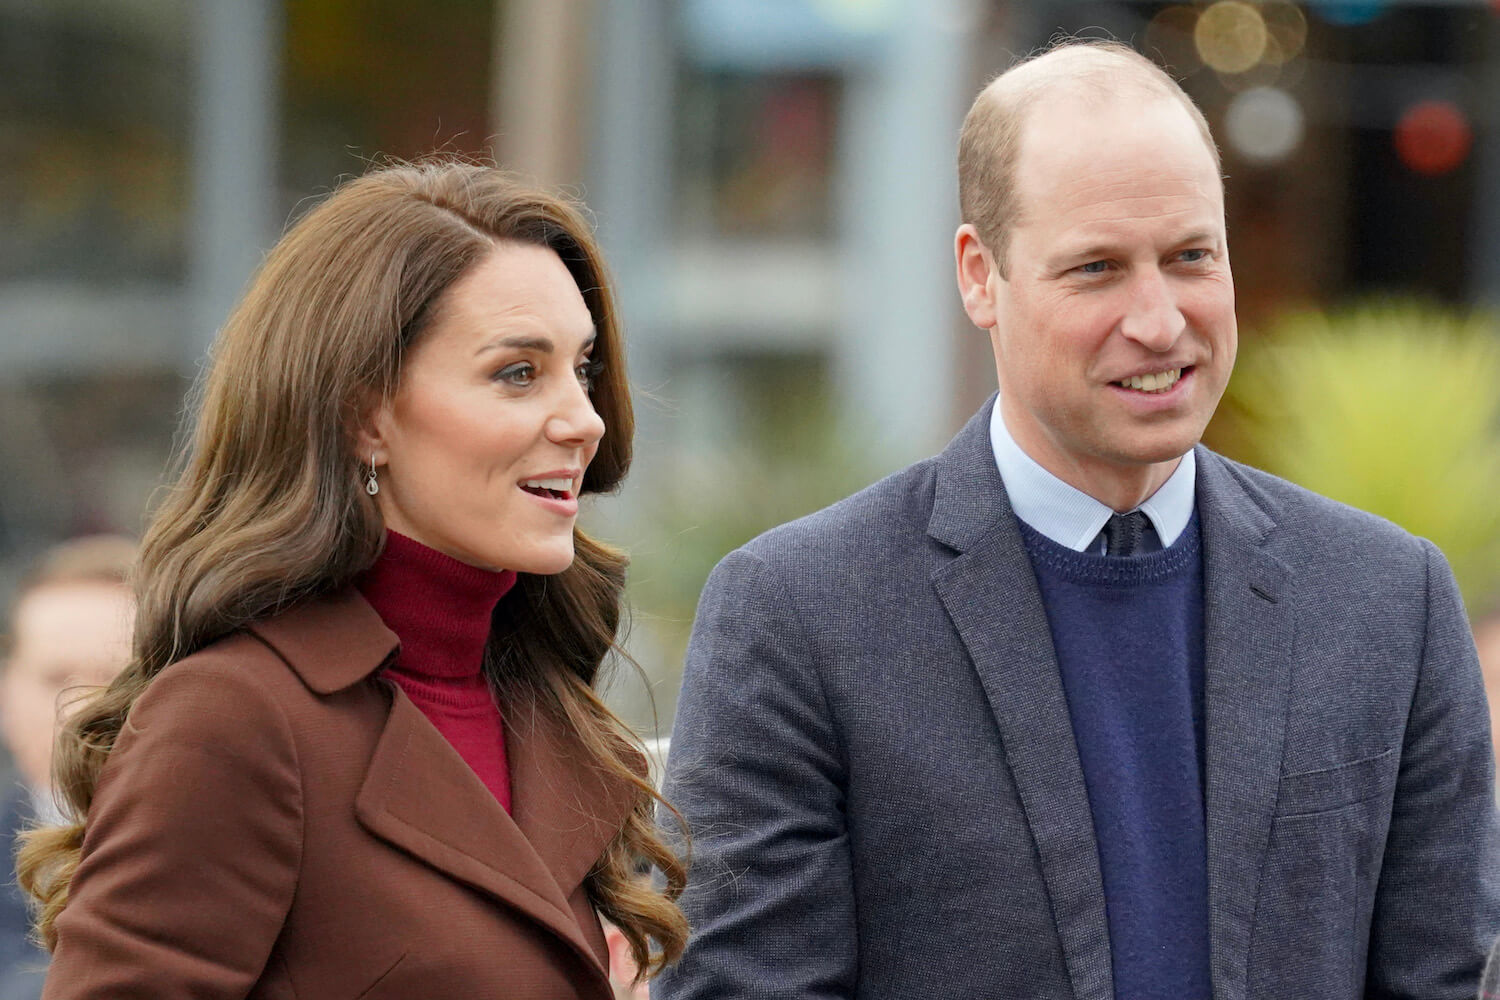 Prince William teased tense moment with Kate Middleton over rugby match outcome